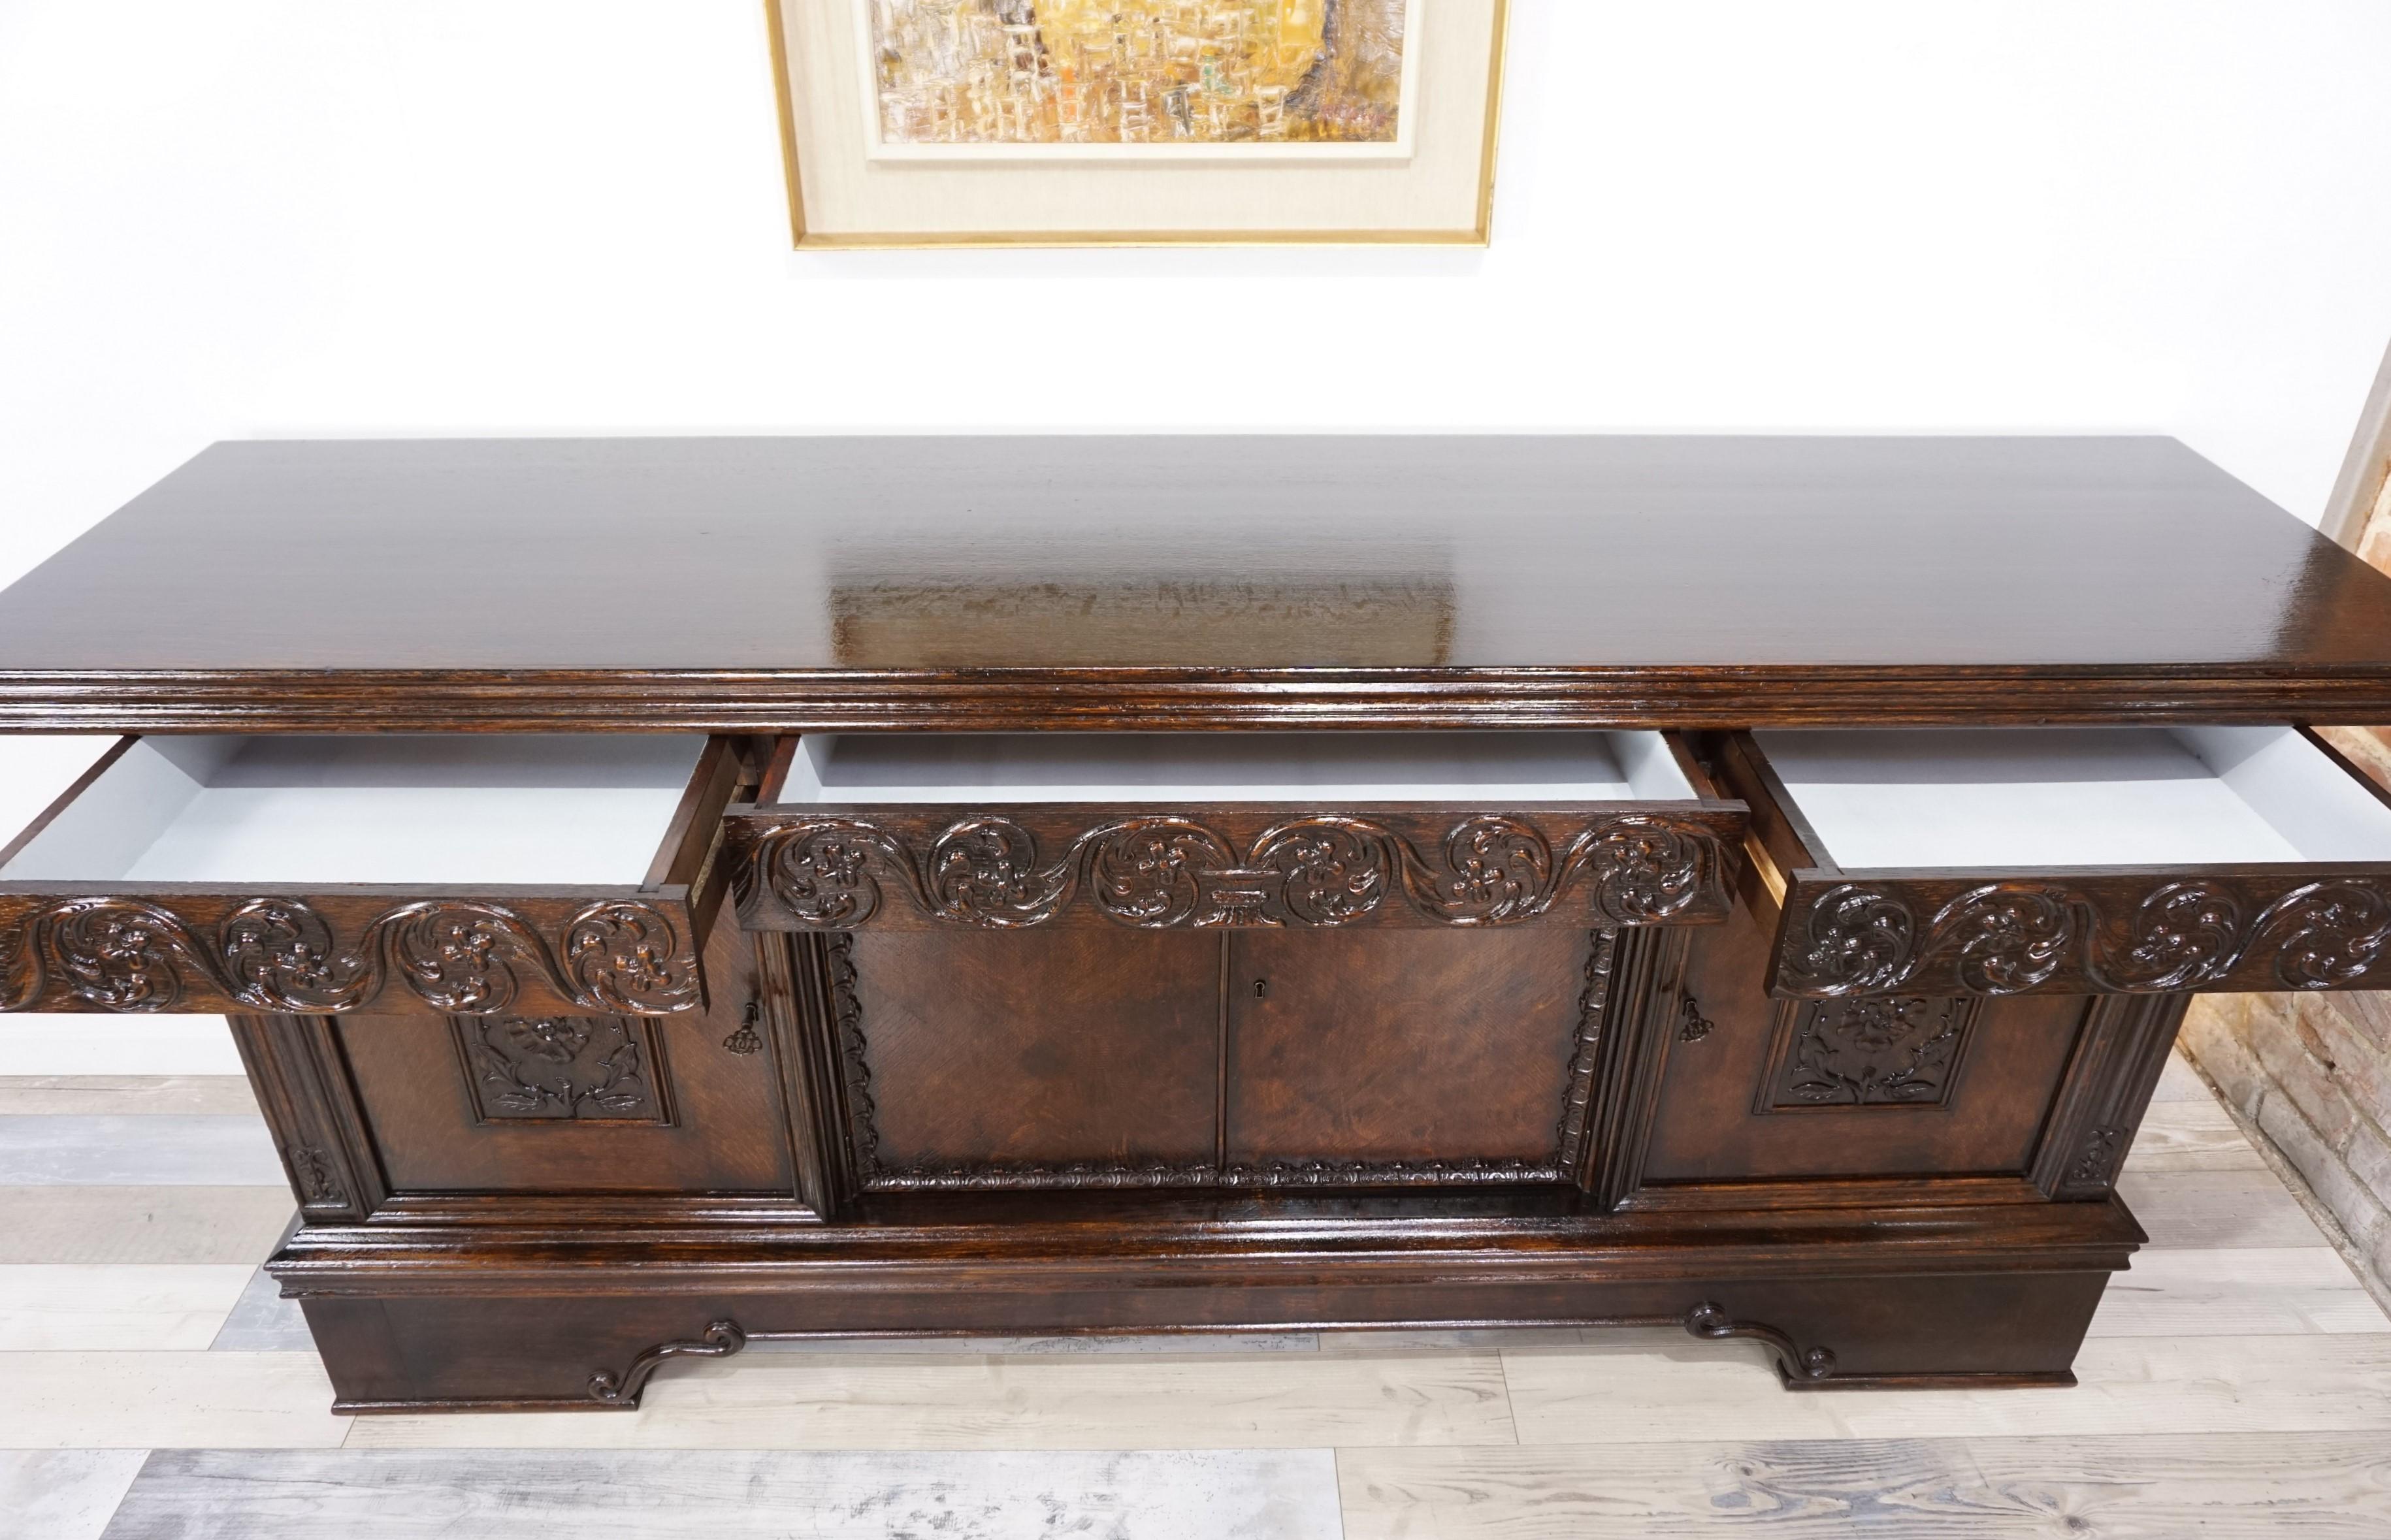 Renaissance Revival Antique Sideboard or Oak Wooden Buffet, 19th-Early 20th Century For Sale